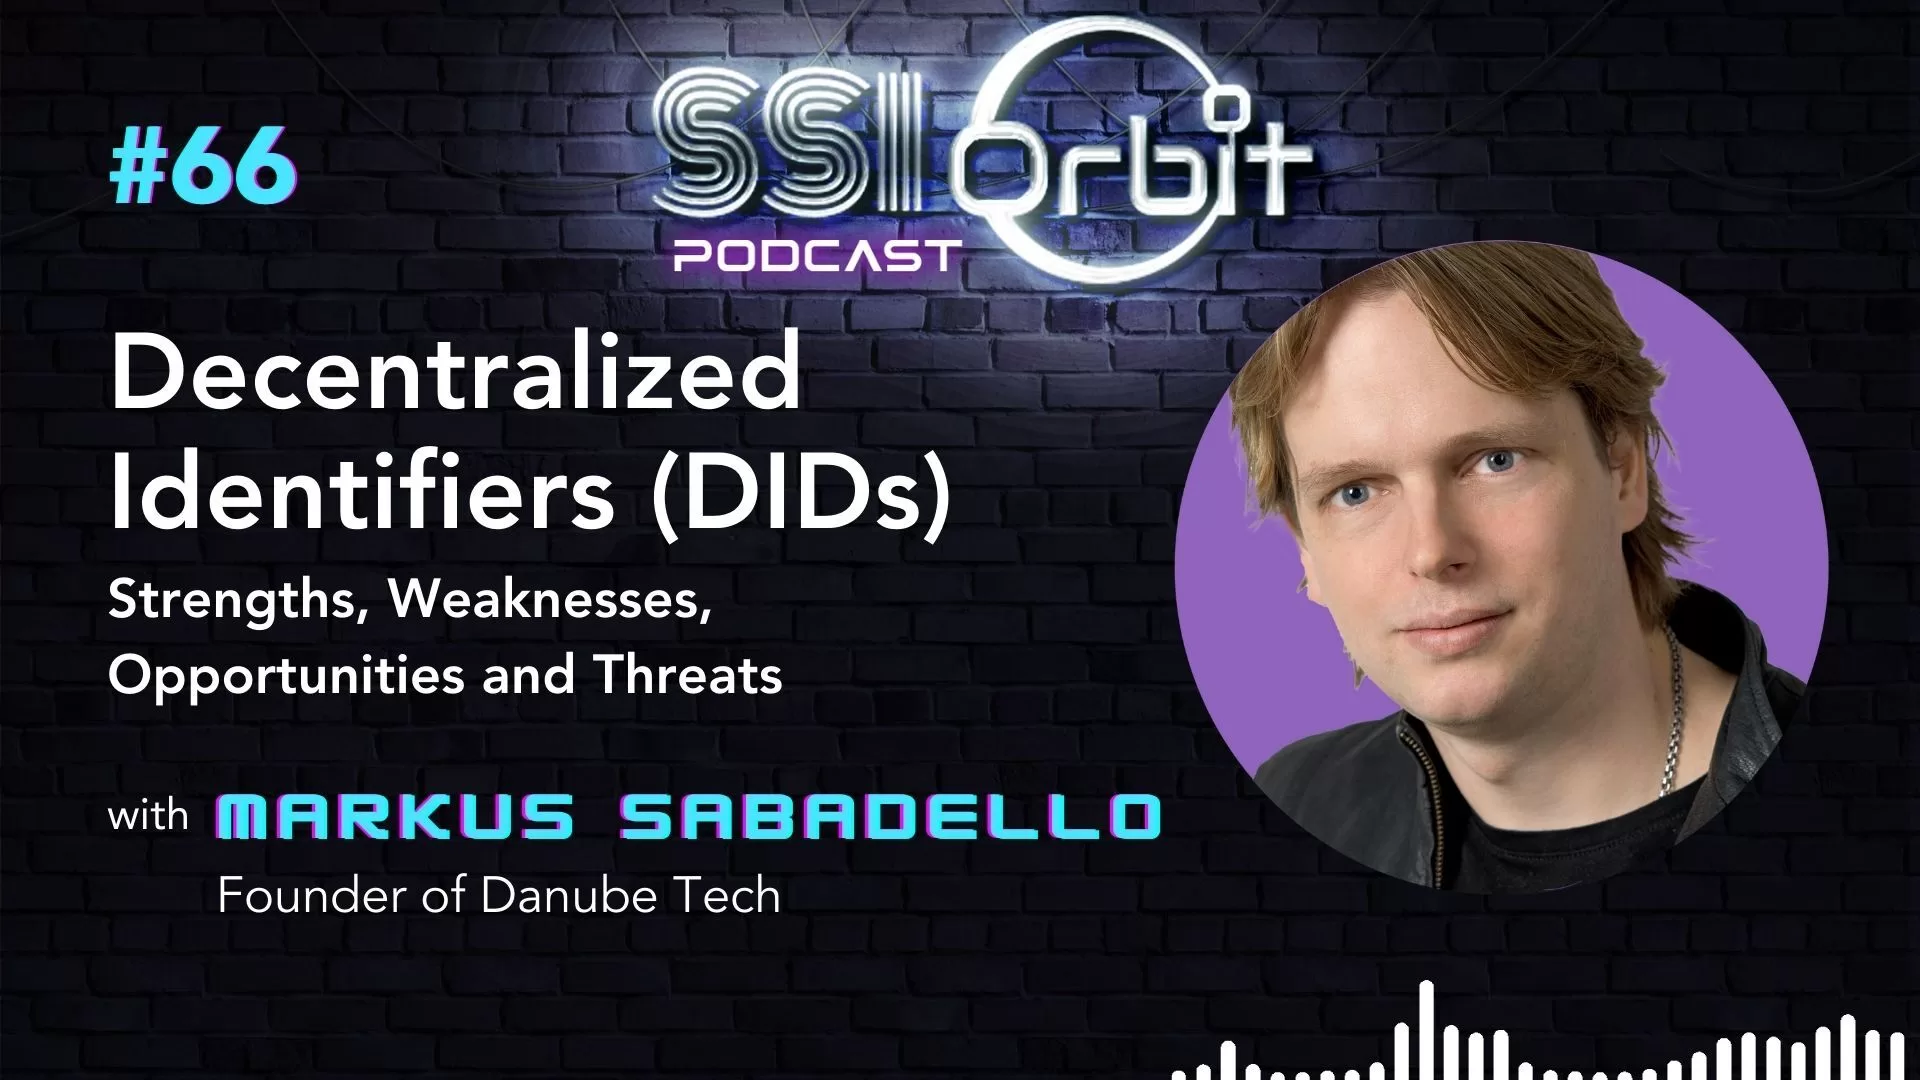 Decentralized Identifiers (DIDs): Strengths, Weaknesses, Opportunities and Threats (with Markus Sabadello)